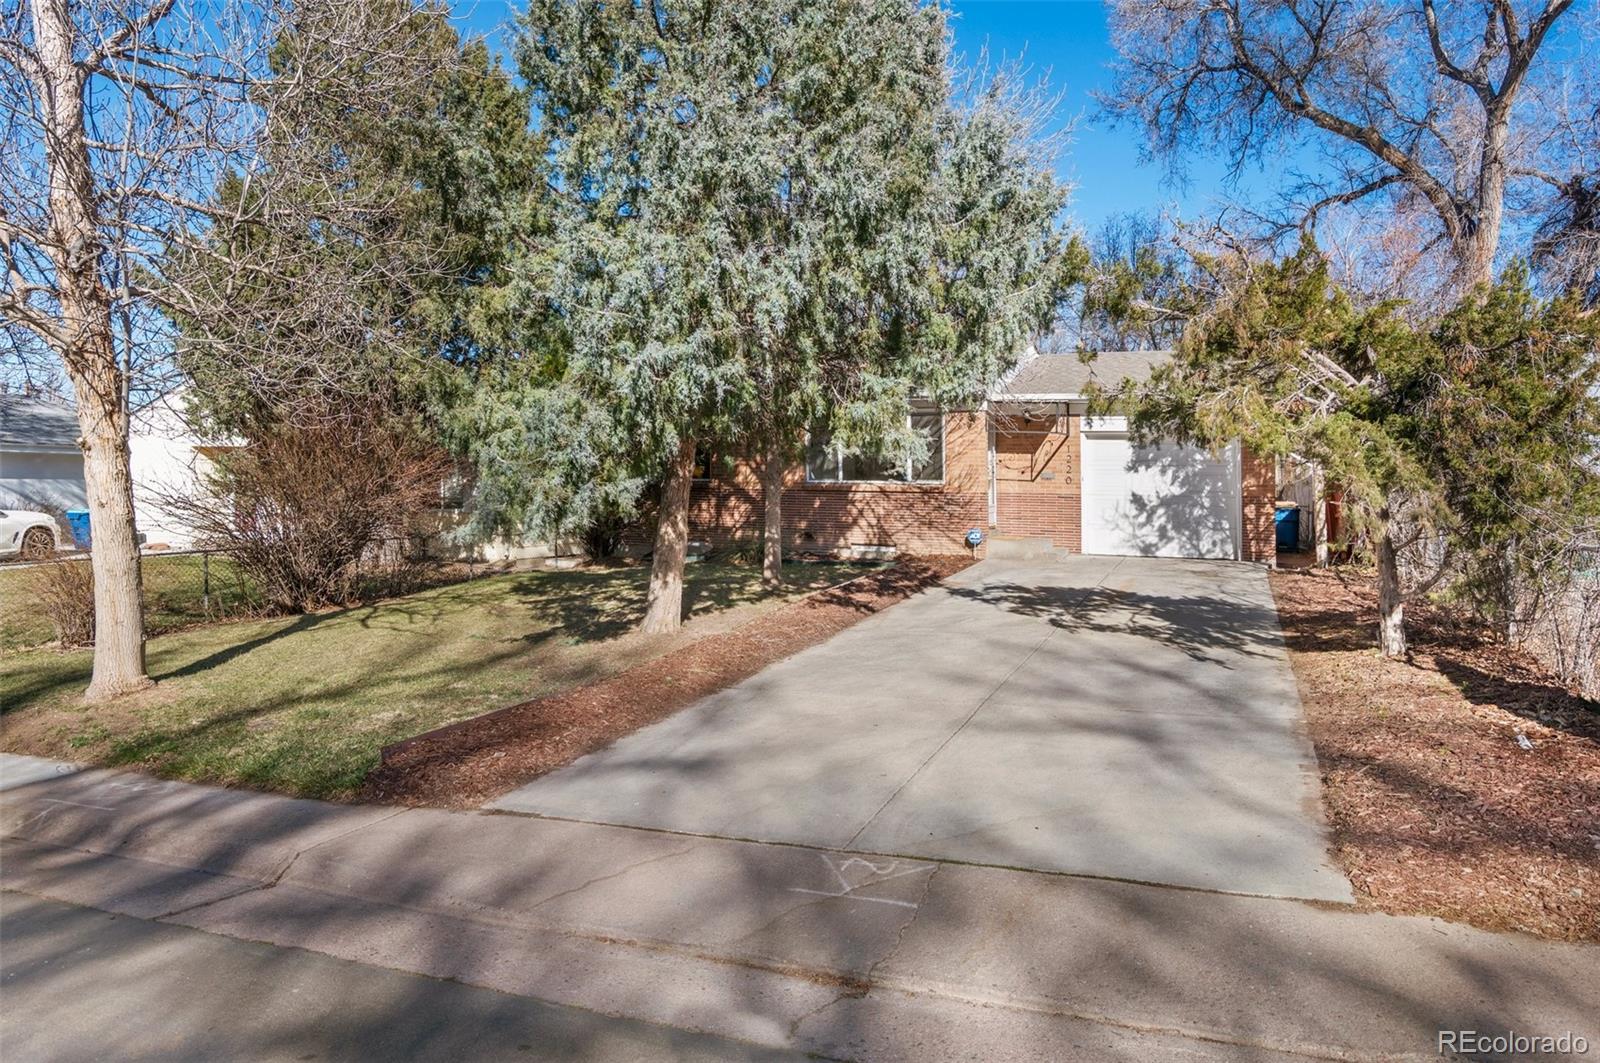 1220  alton street, aurora sold home. Closed on 2024-04-26 for $465,000.